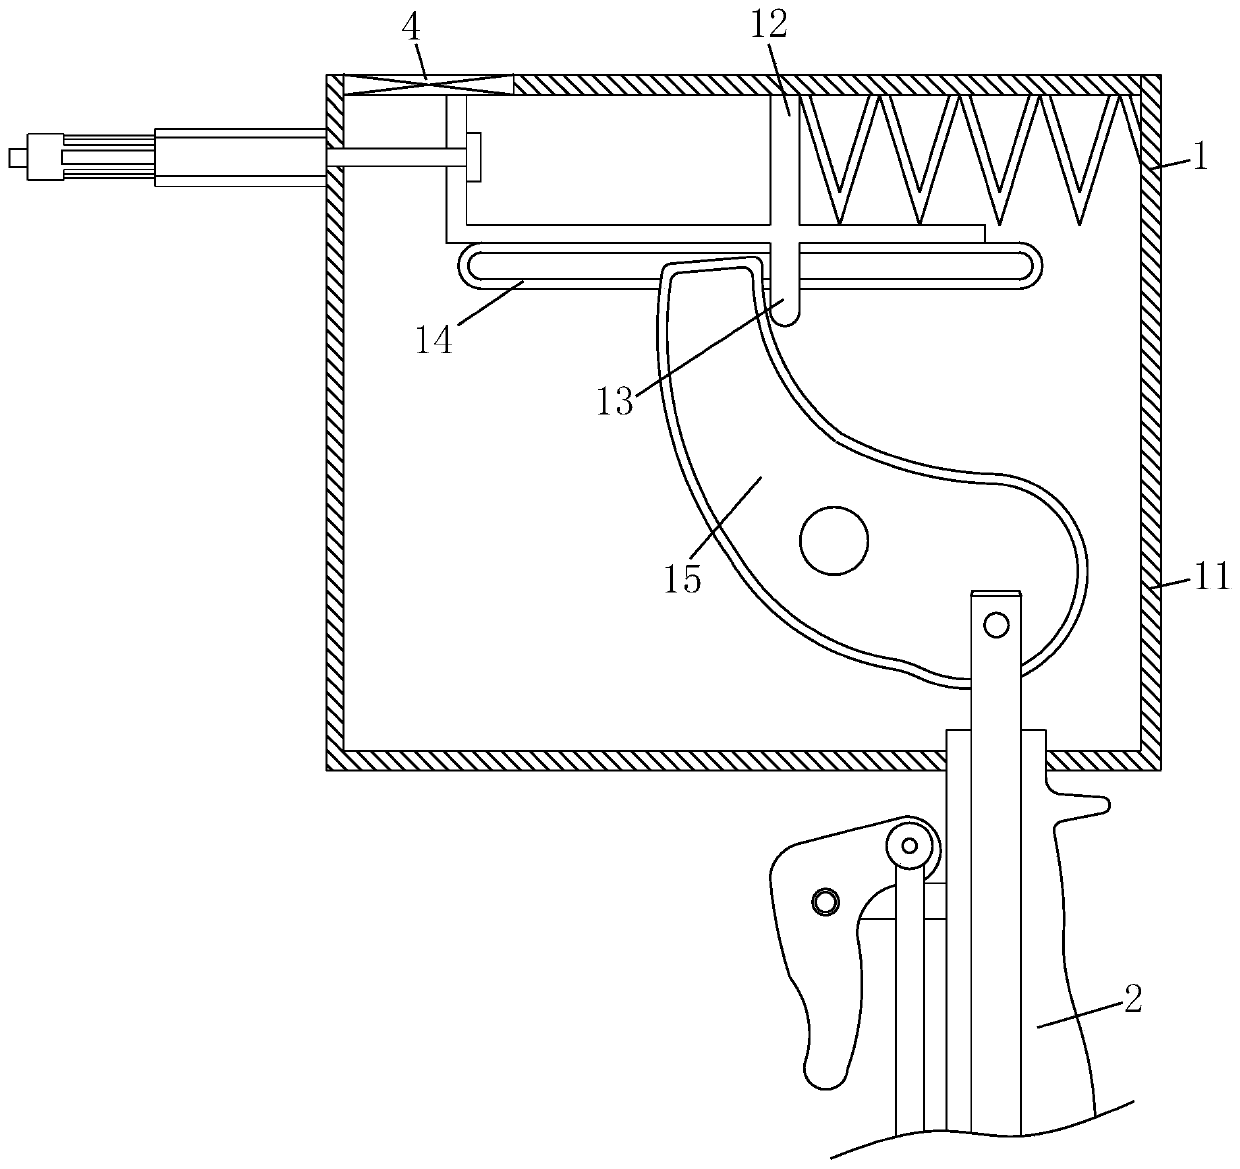 Direct-current electric hand riveter